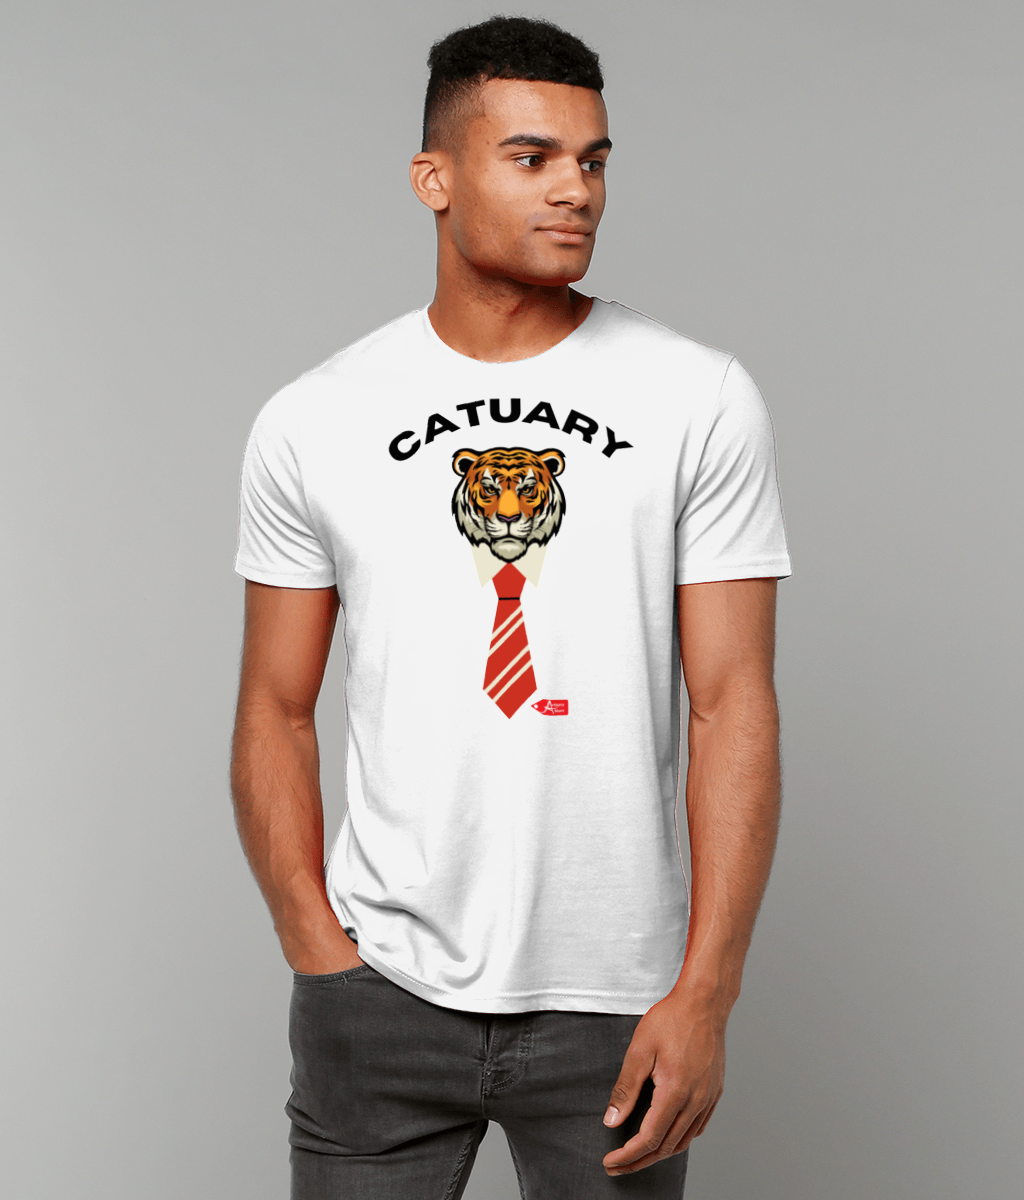 Catuary Tiger in Tie T-Shirt